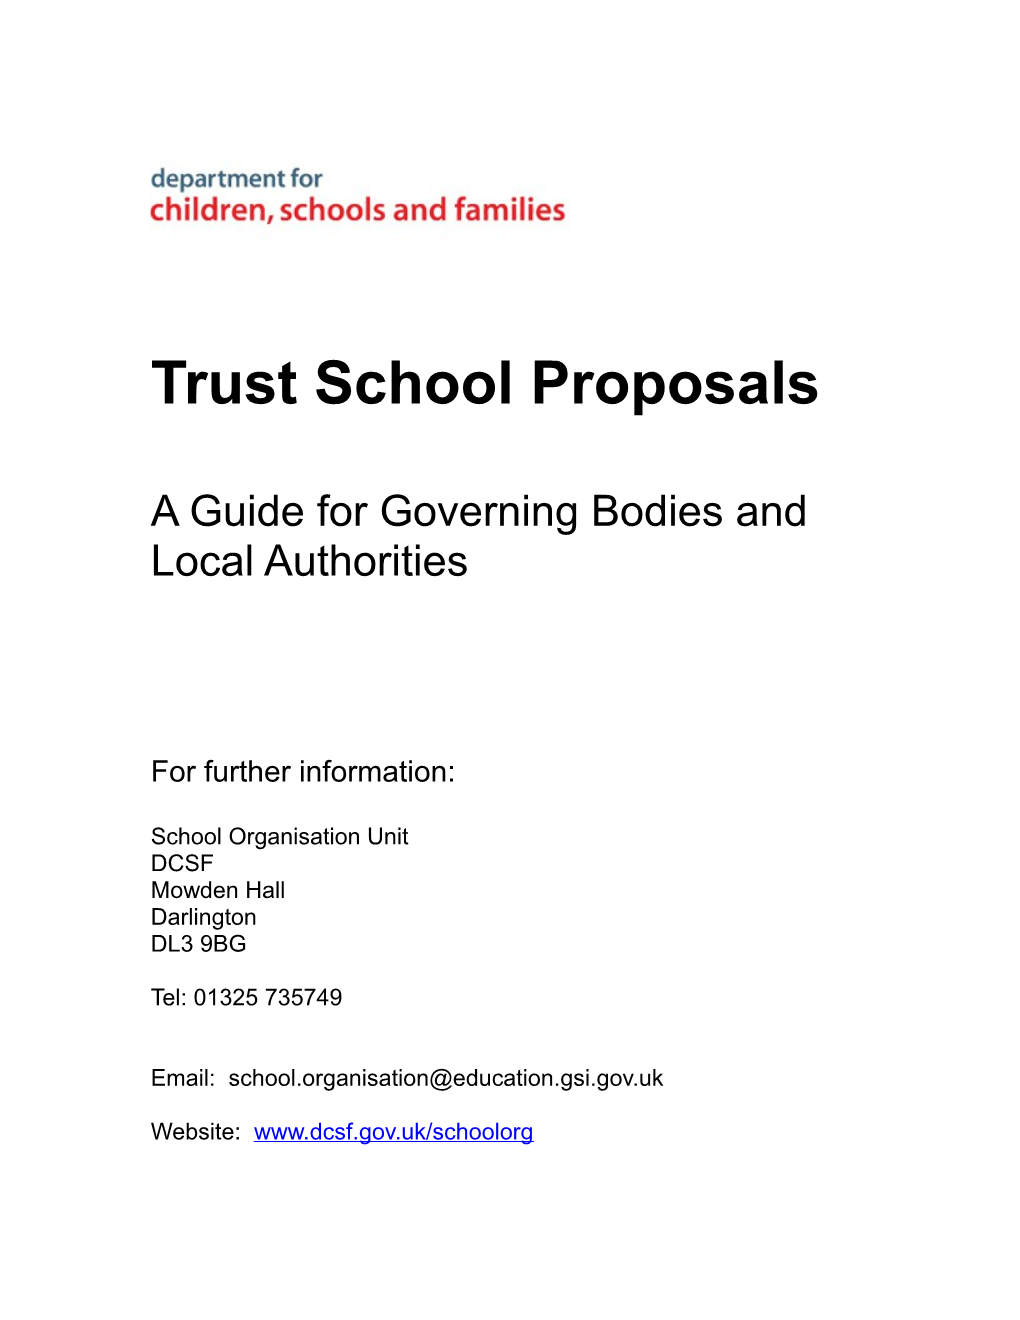 Trust School Proposals a Guide for Governing Bodies and Local Authorities